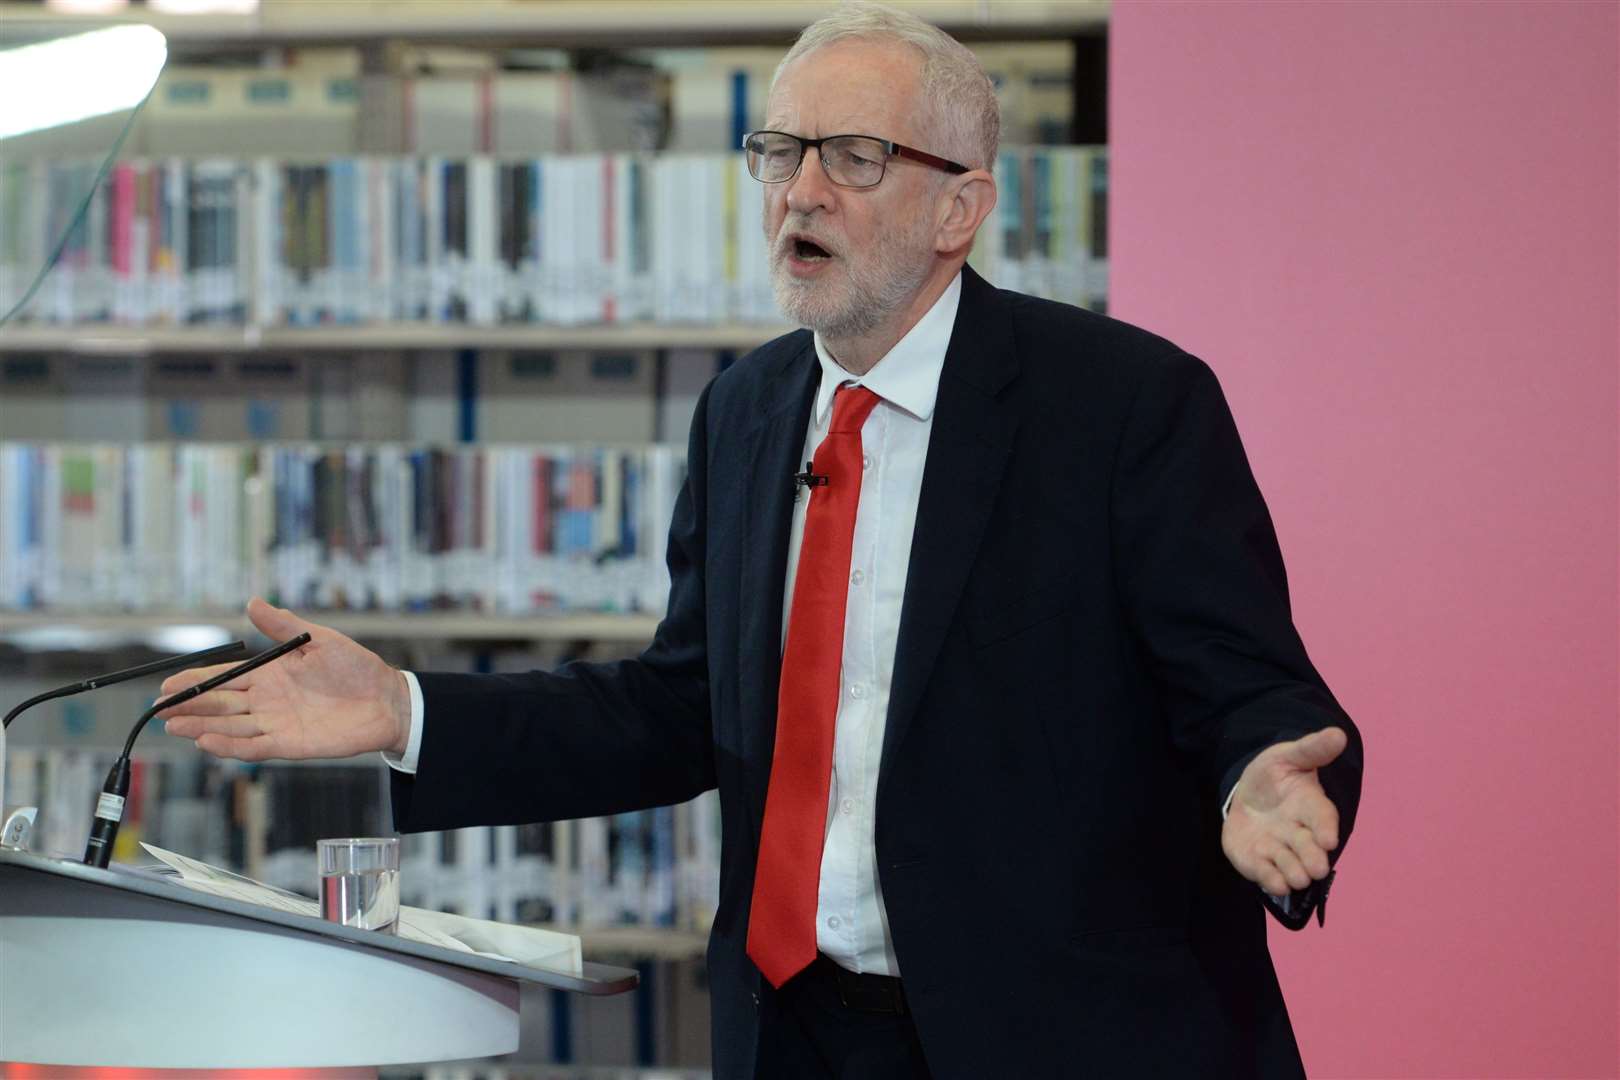 Jeremy Corbyn's handling of the anti-Semitism row engulfing Labour has been criticised nationally